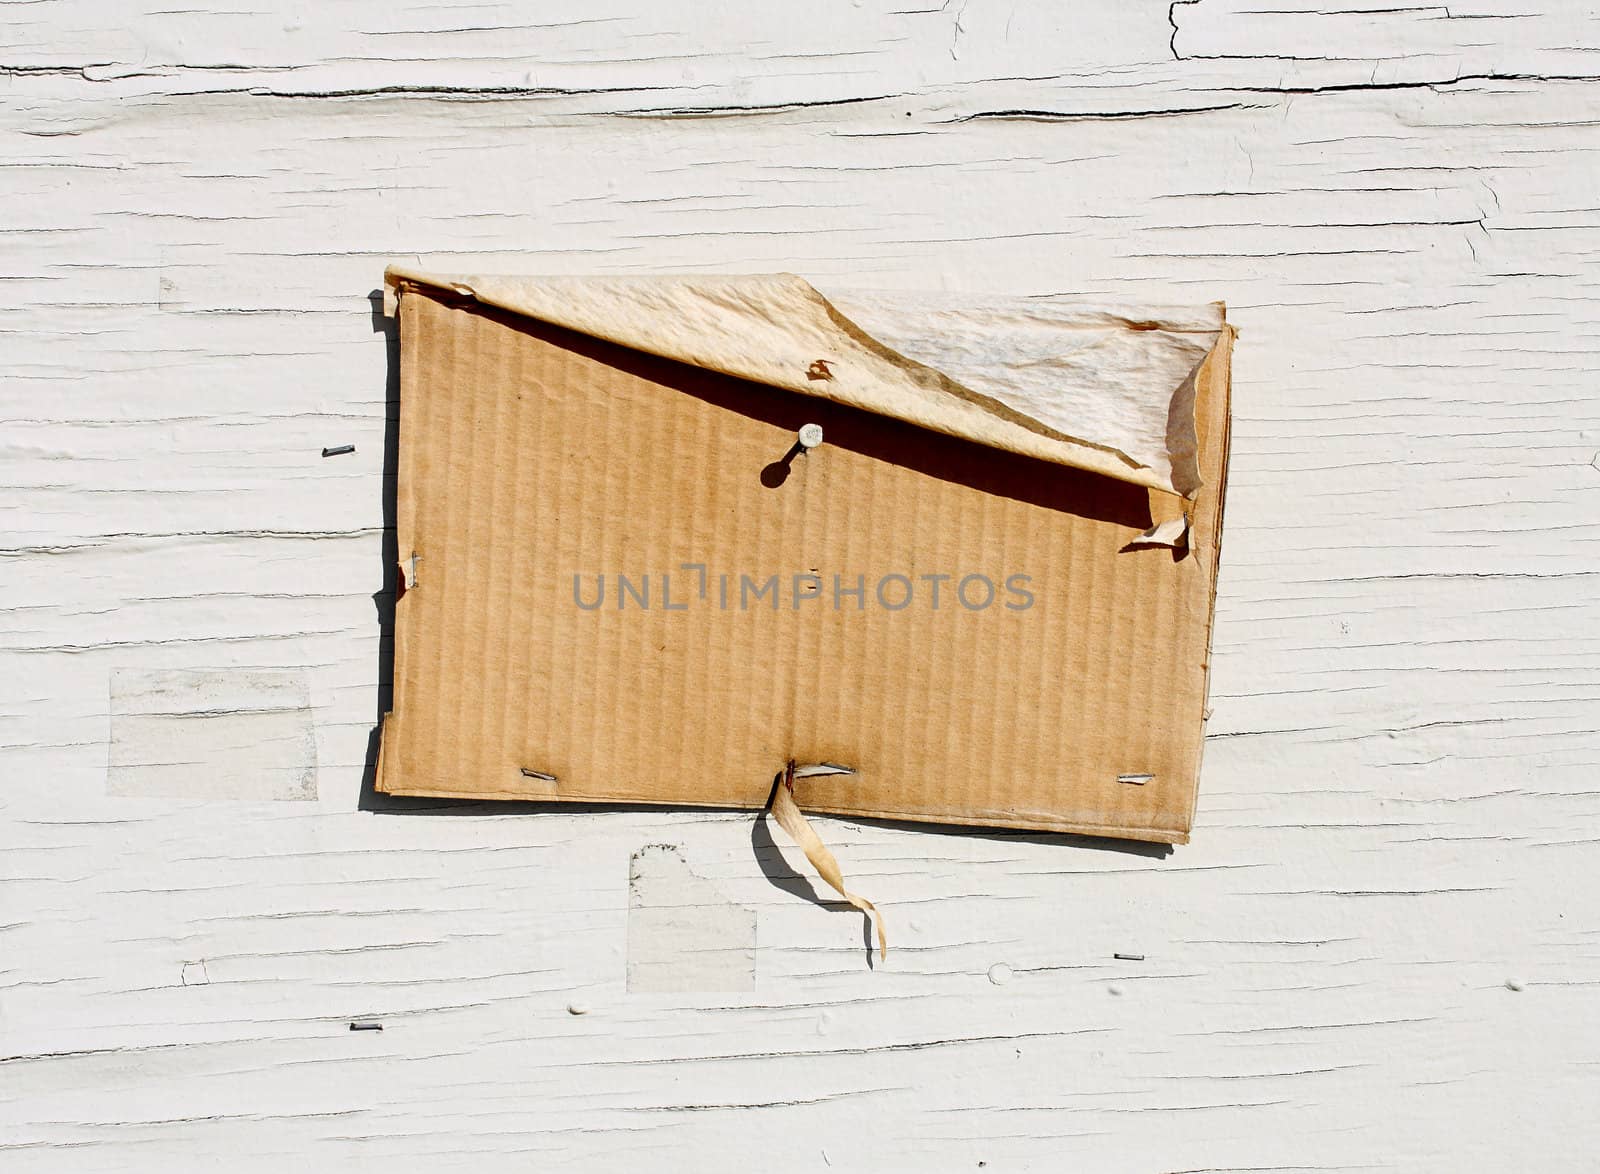 Shot in bright sunlight, this is a close up of a weathered blank cardboard sign nailed and stapled to a wood wall.  The wall is painted white and is also weathered and distressed.